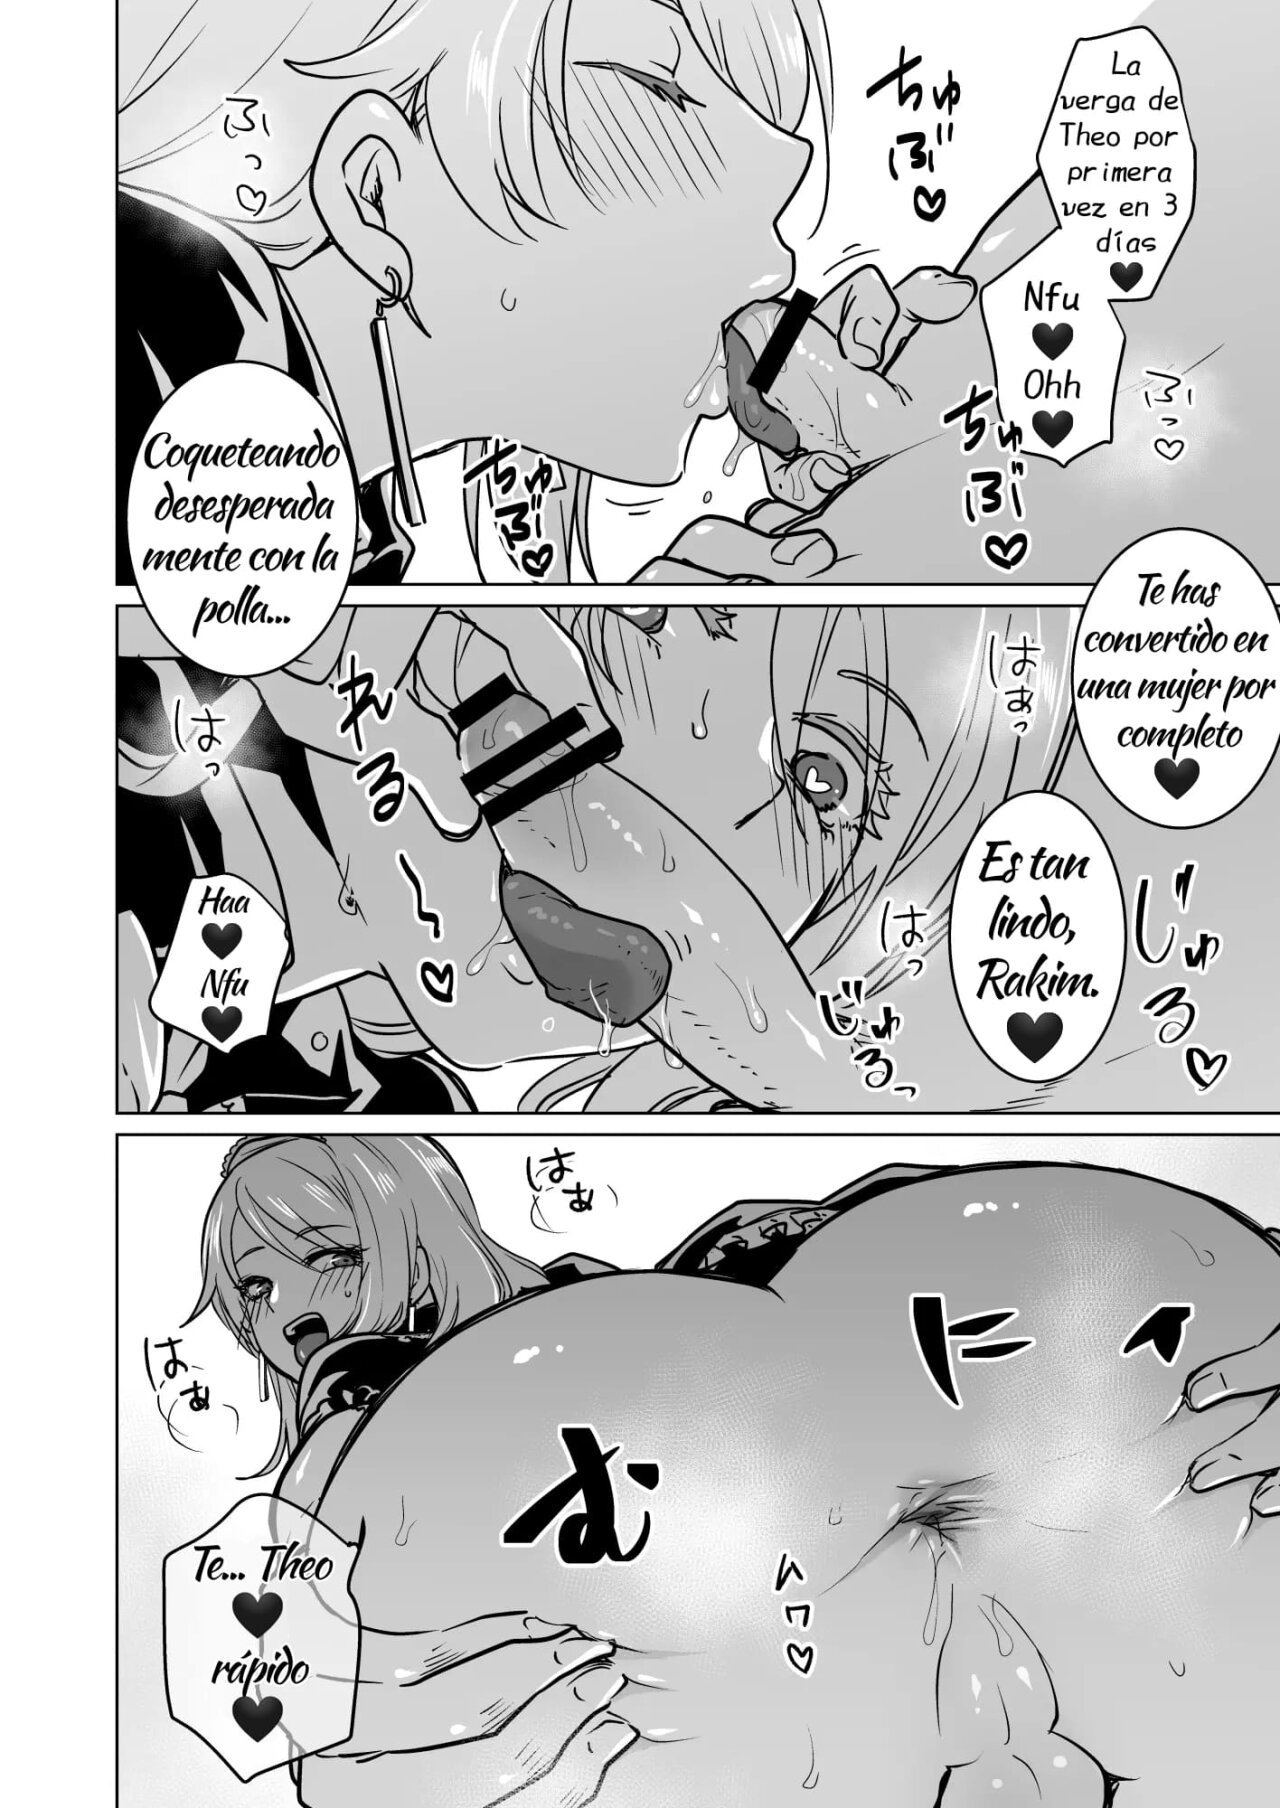 Manga of the strongest shota and female brothers(completo) - 29